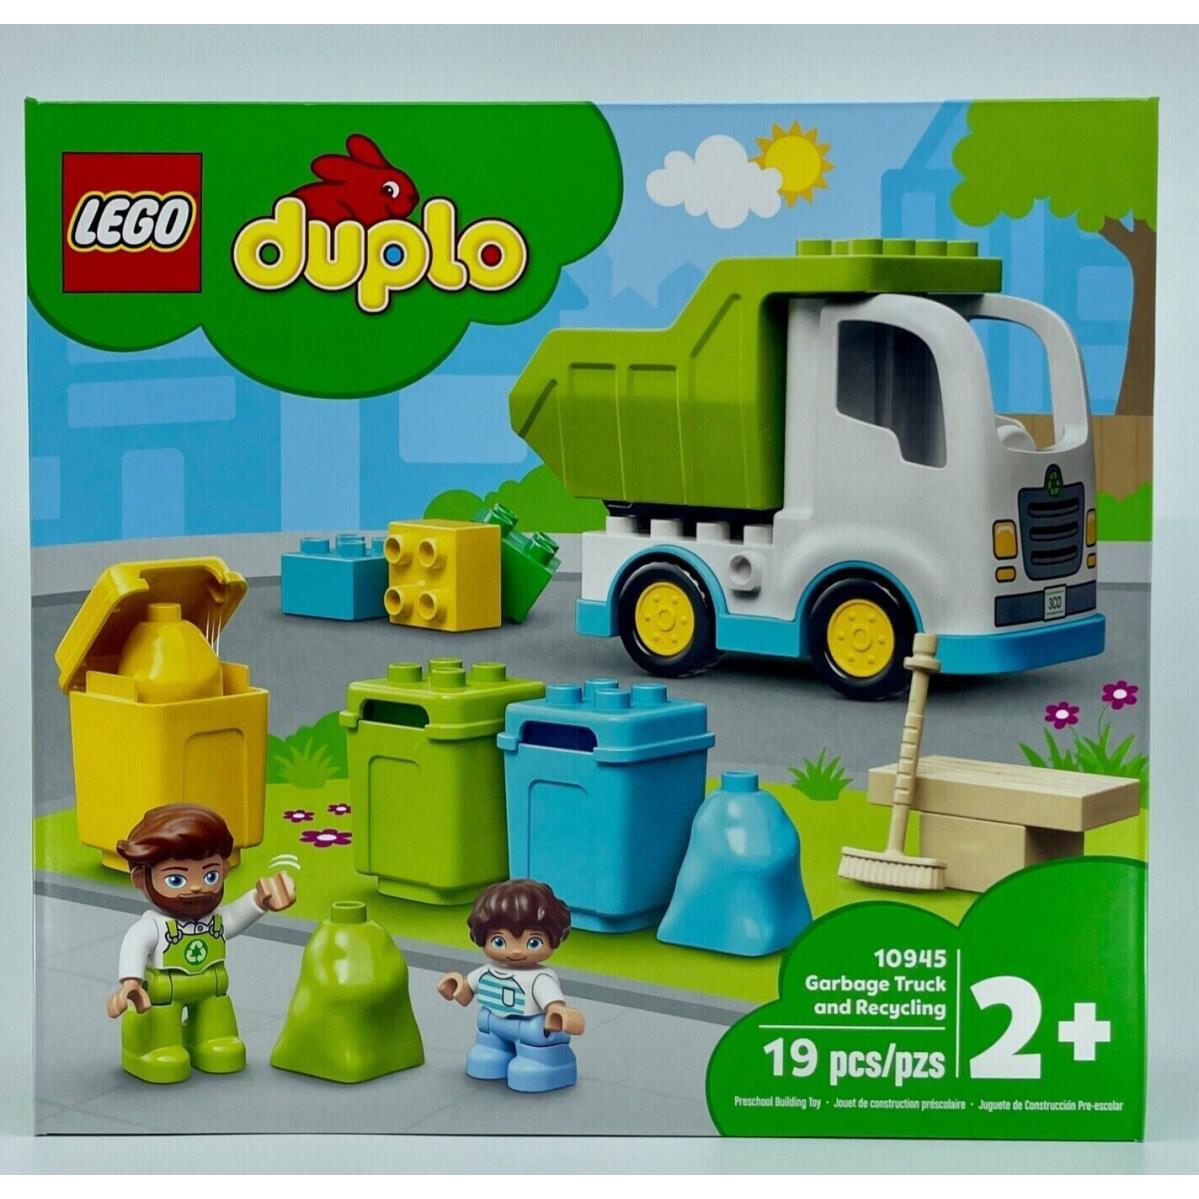 Lego Duplo: Garbage Truck and Recycling 10945 Retired Set 10pcs Building Kit